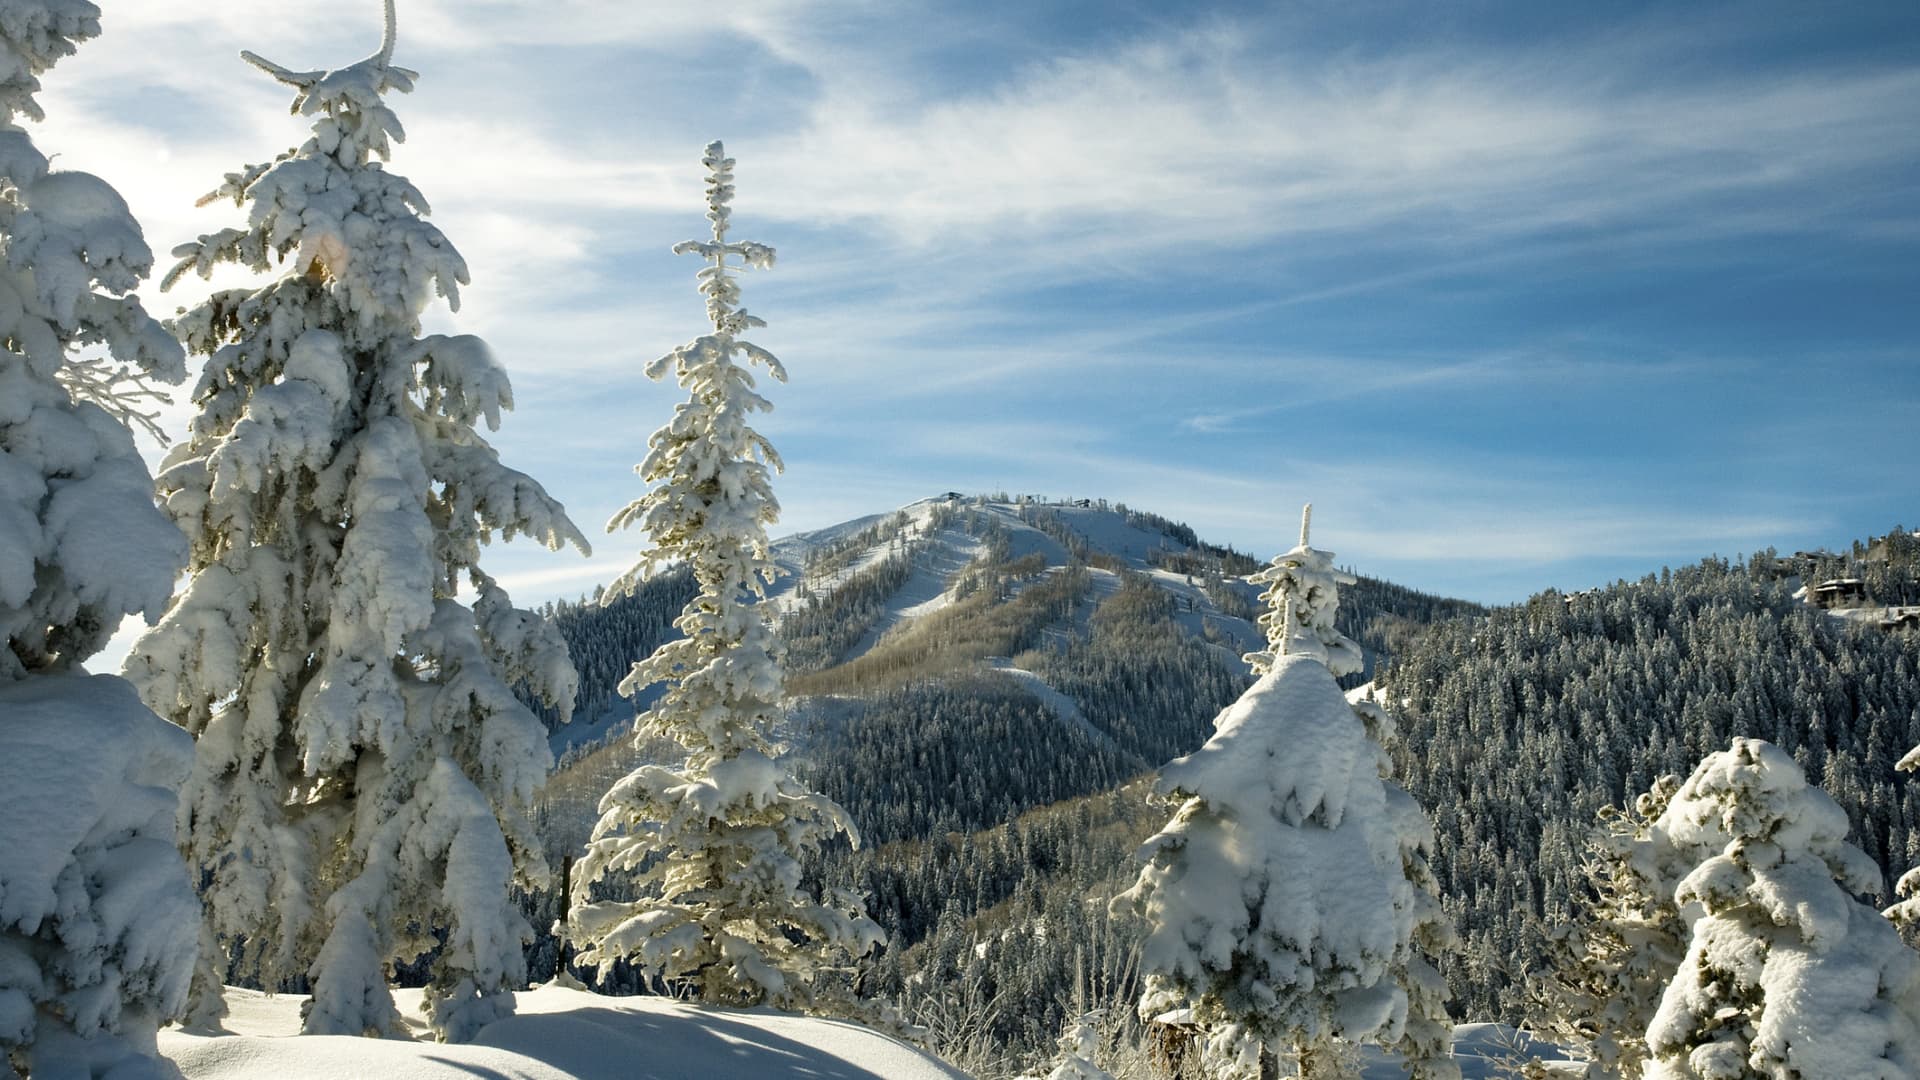 Park City, Utah ranked as the No. 2 best ski area in North America, according to HomeToGo.